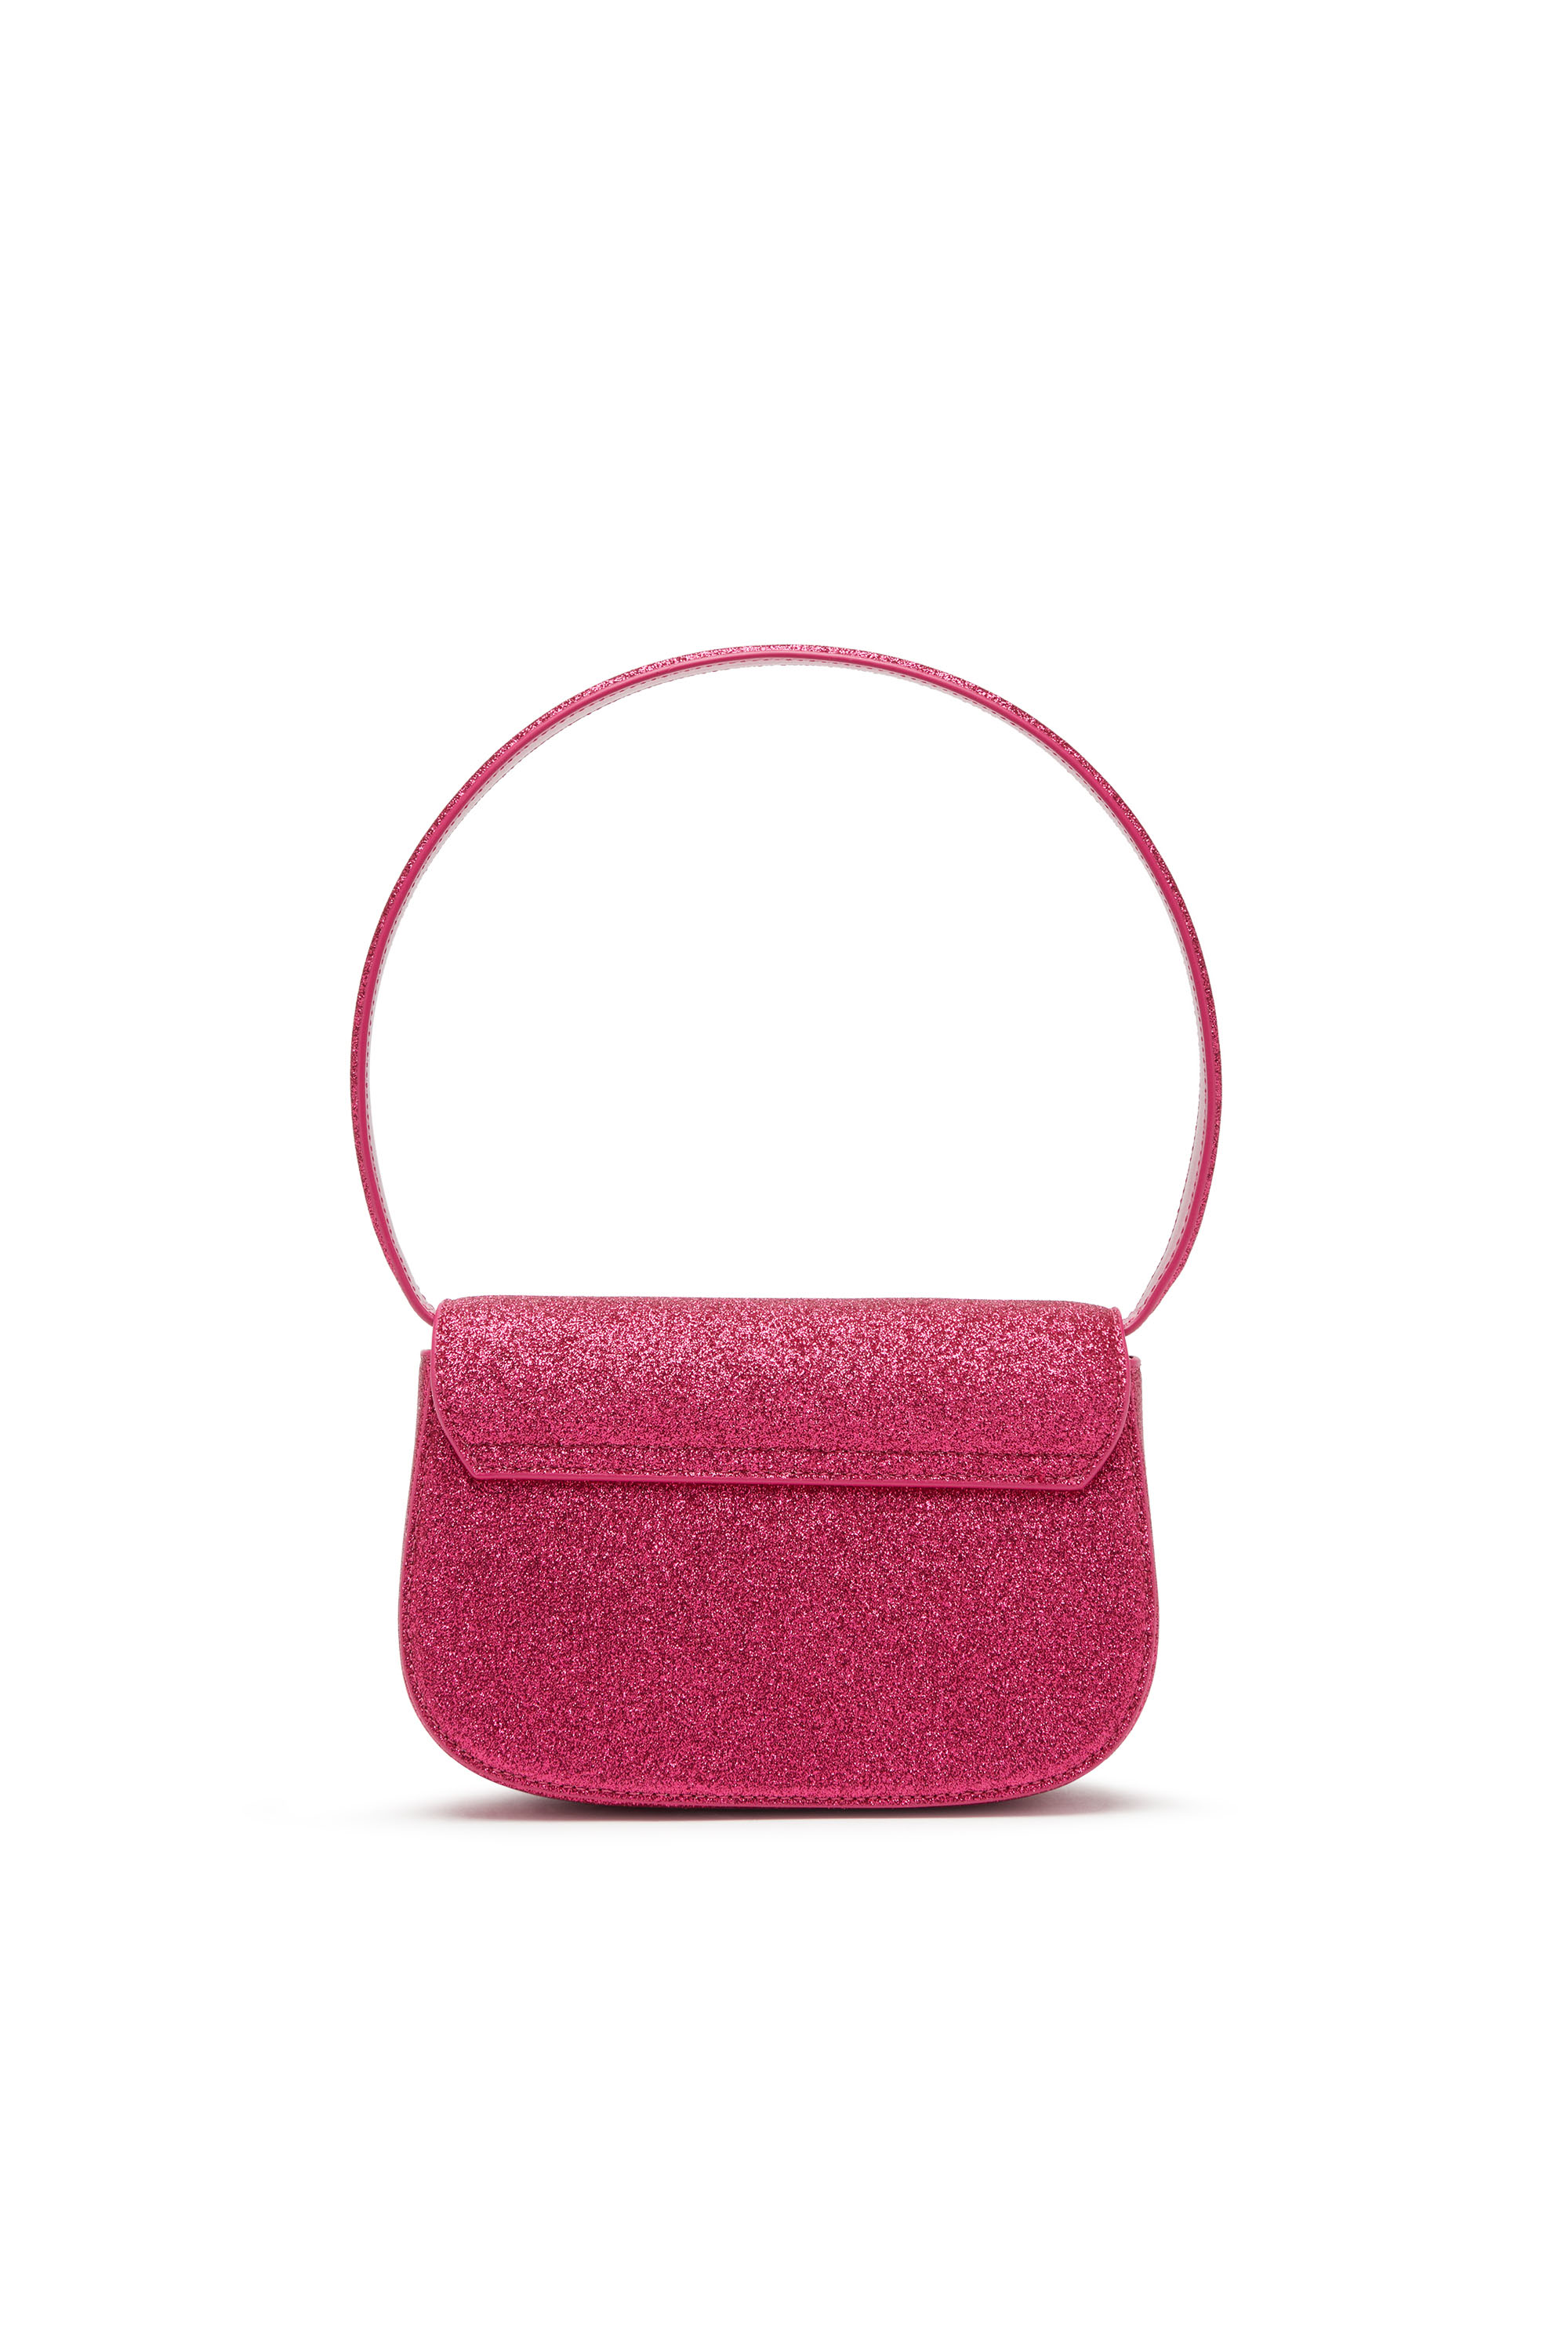 Diesel - 1DR, Woman 1DR-Iconic shoulder bag in glitter fabric in Pink - Image 2